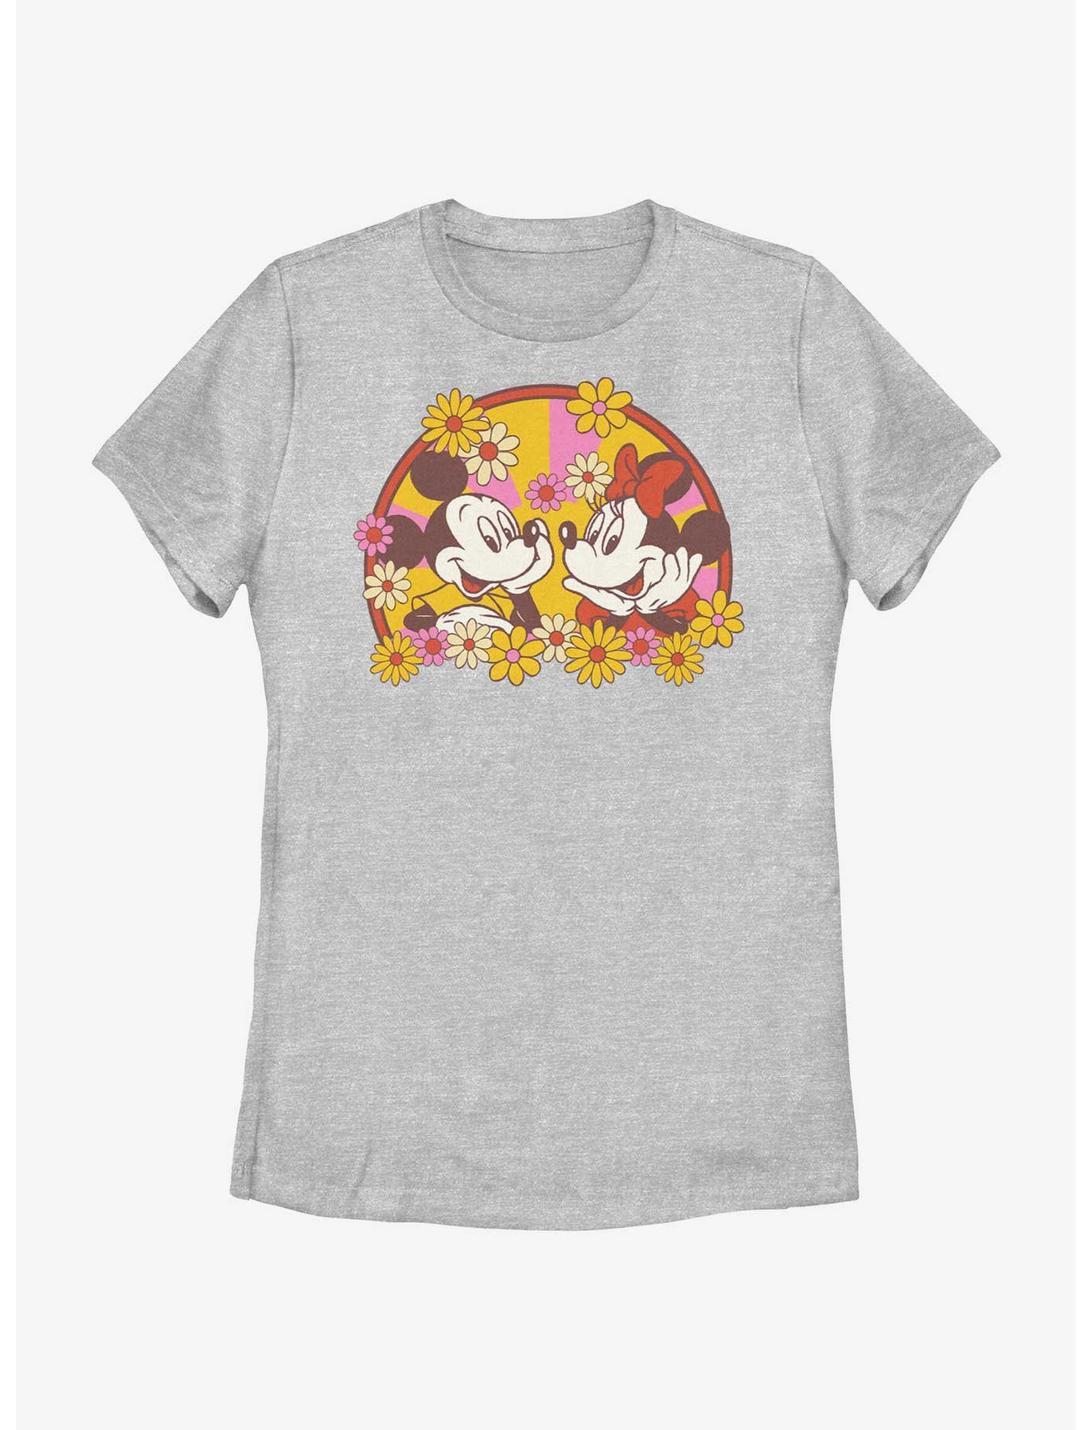 Disney Mickey Mouse Mickey & Minnie Spring Bloom Womens T-Shirt, ATH HTR, hi-res